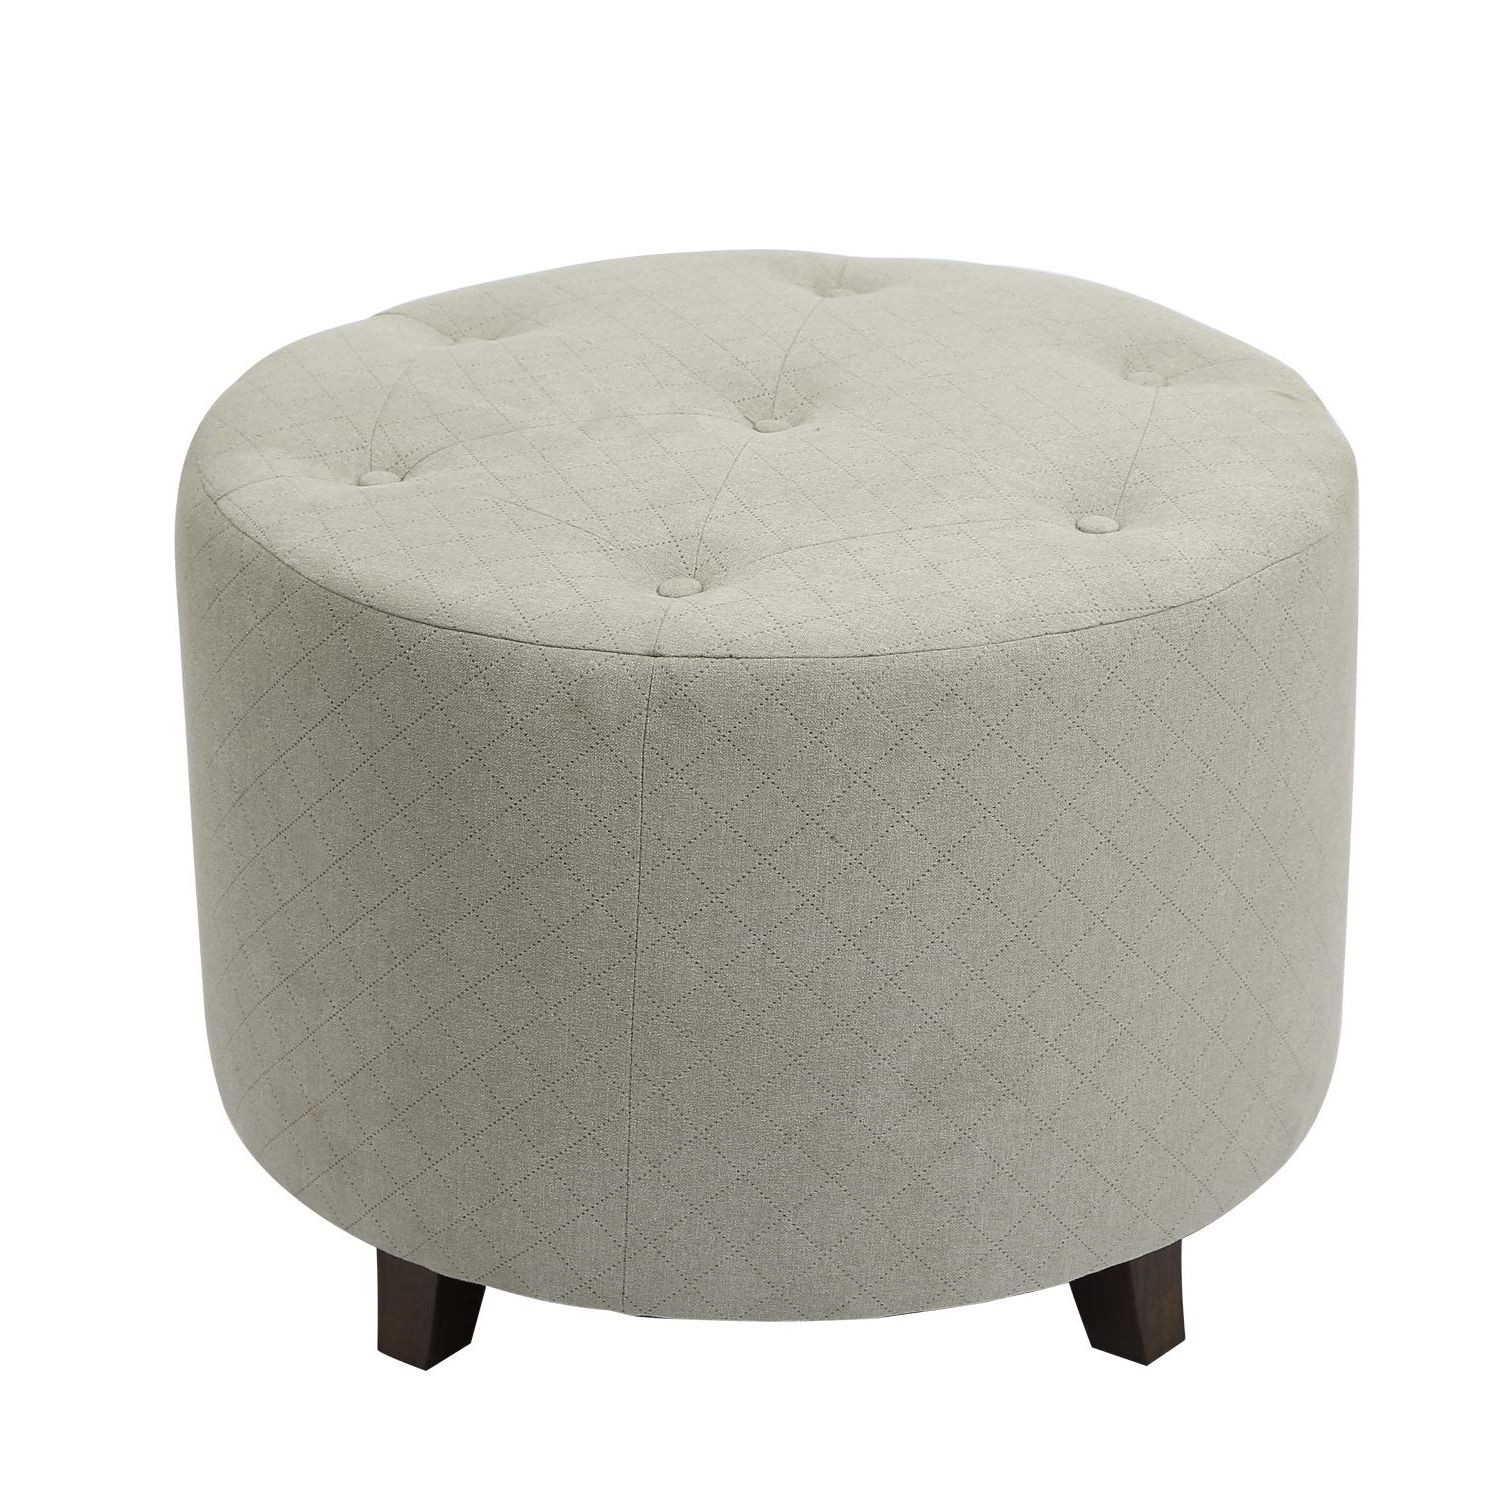 White Large Round Ottomans Regarding Fashionable Adeco Ft0273 1 Round, Fabric Foot Rest And Seat, Modern Button Tufted (View 9 of 10)